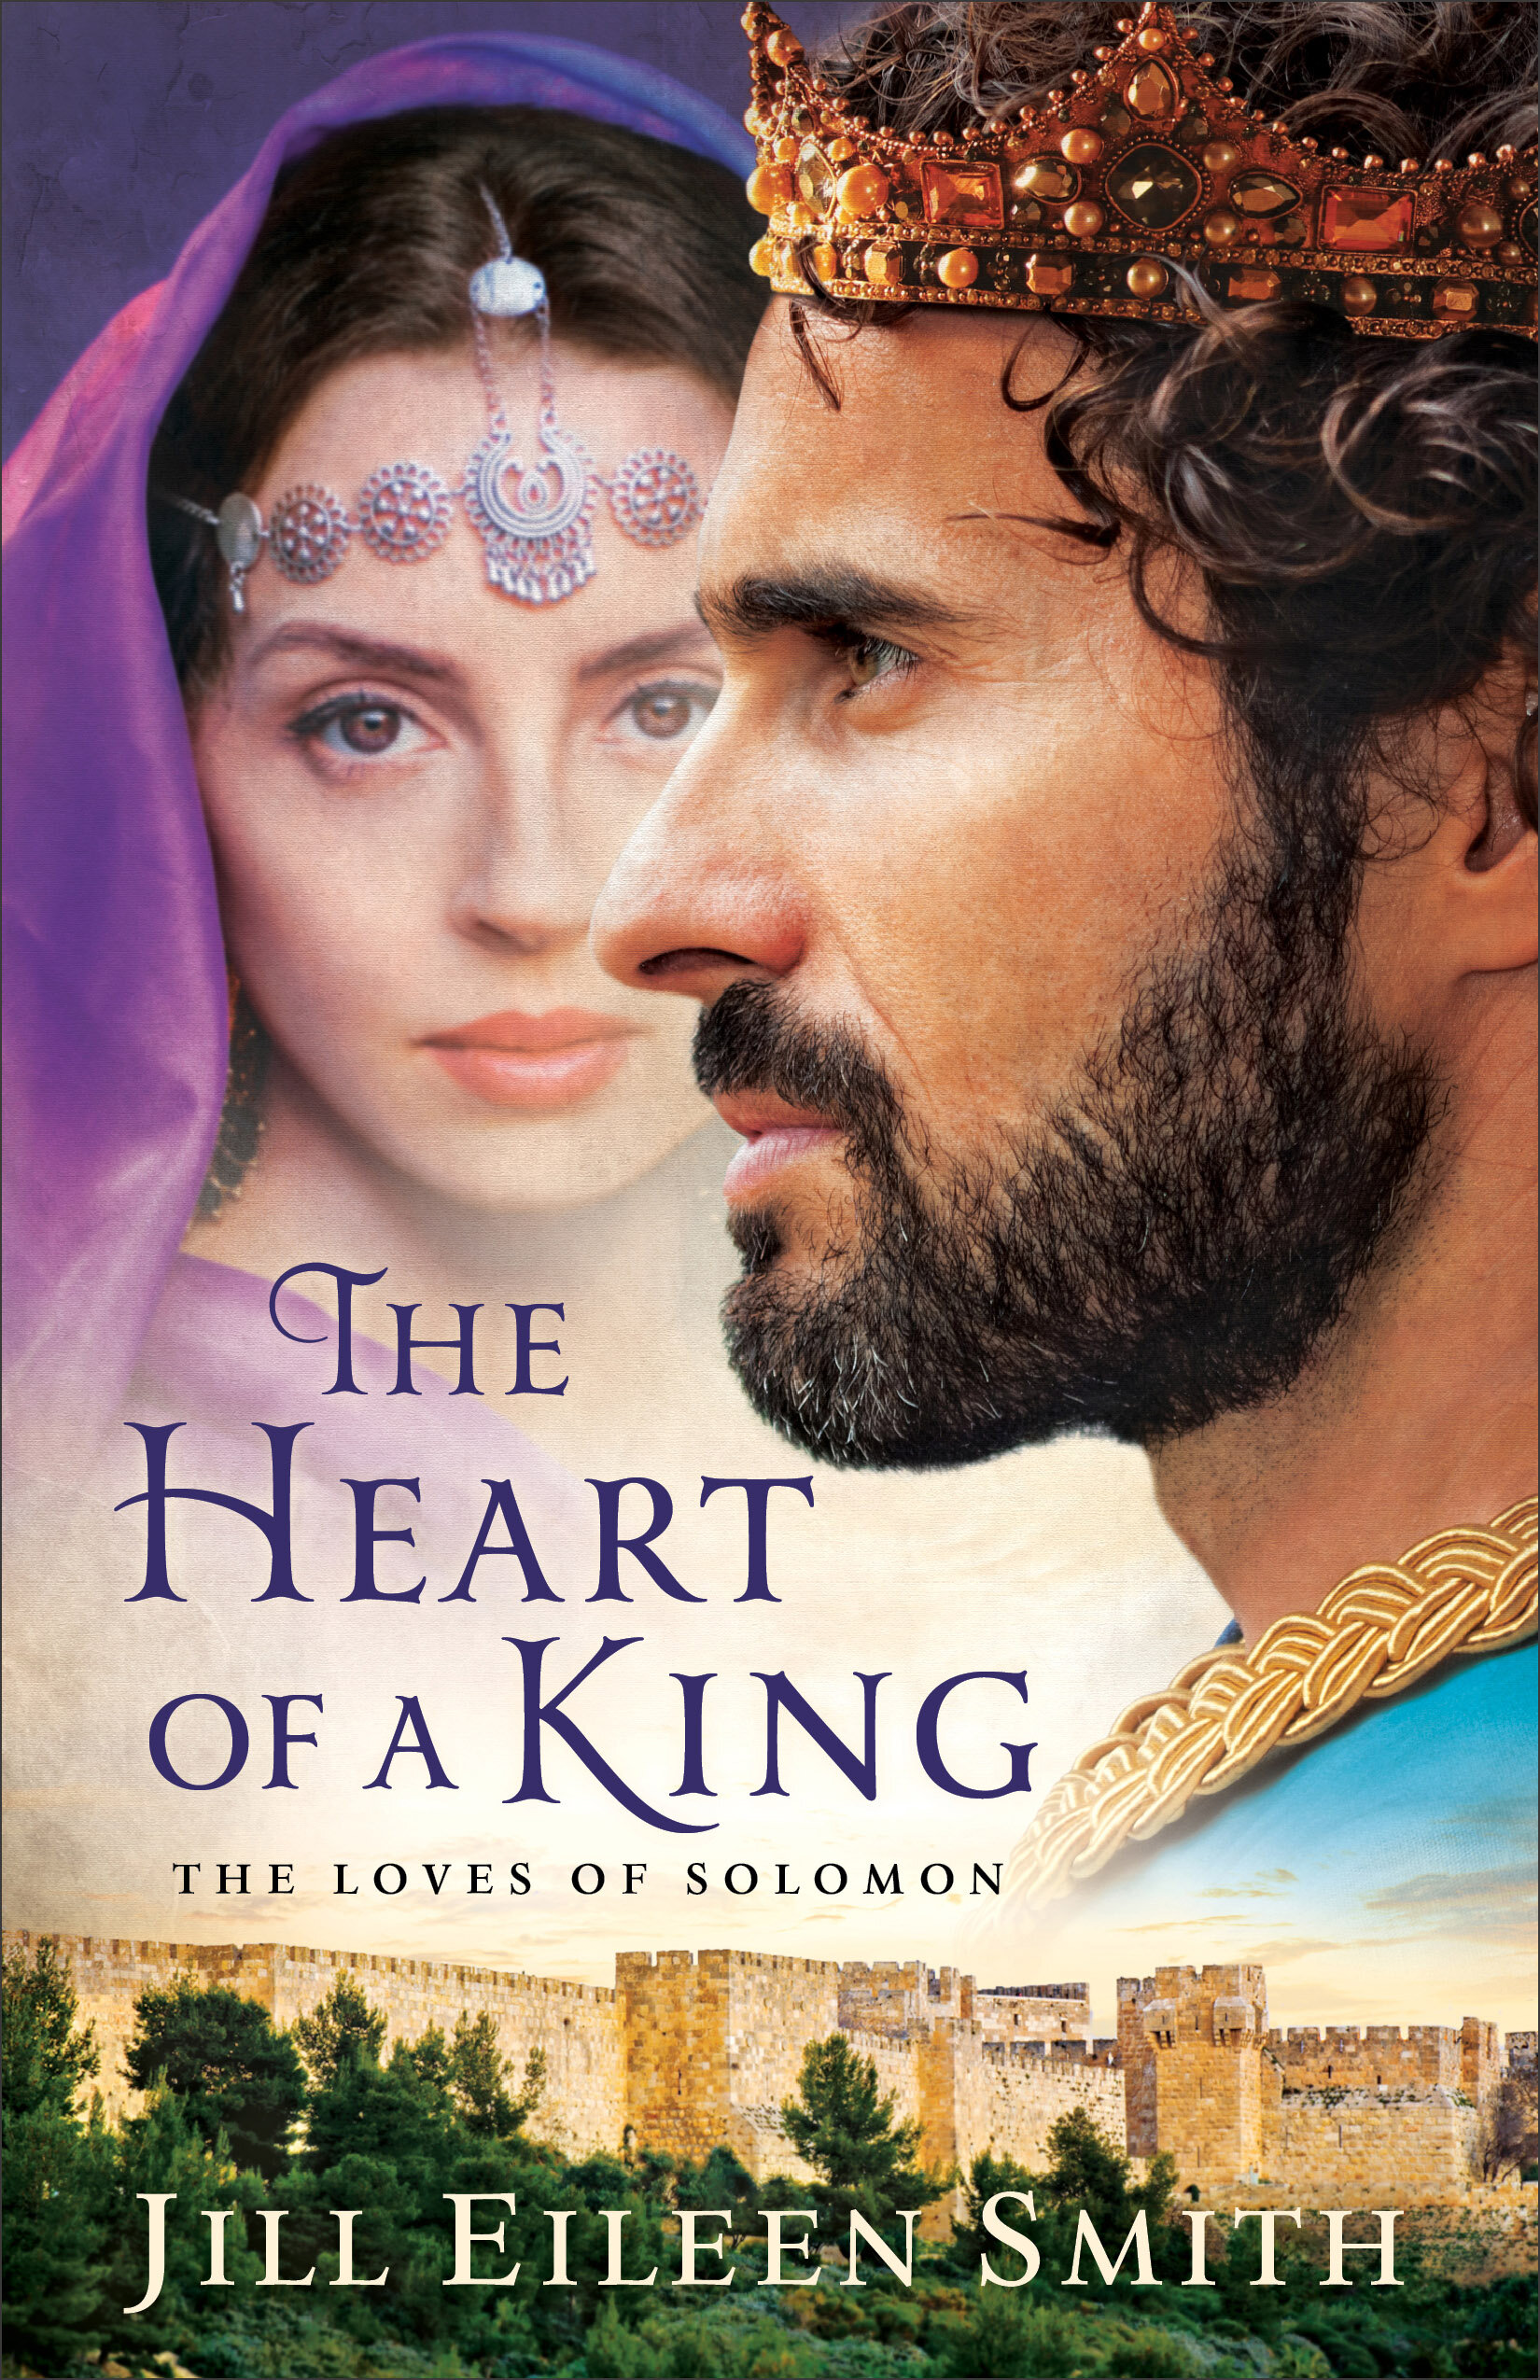 The Heart of a King: The Loves of Solomon